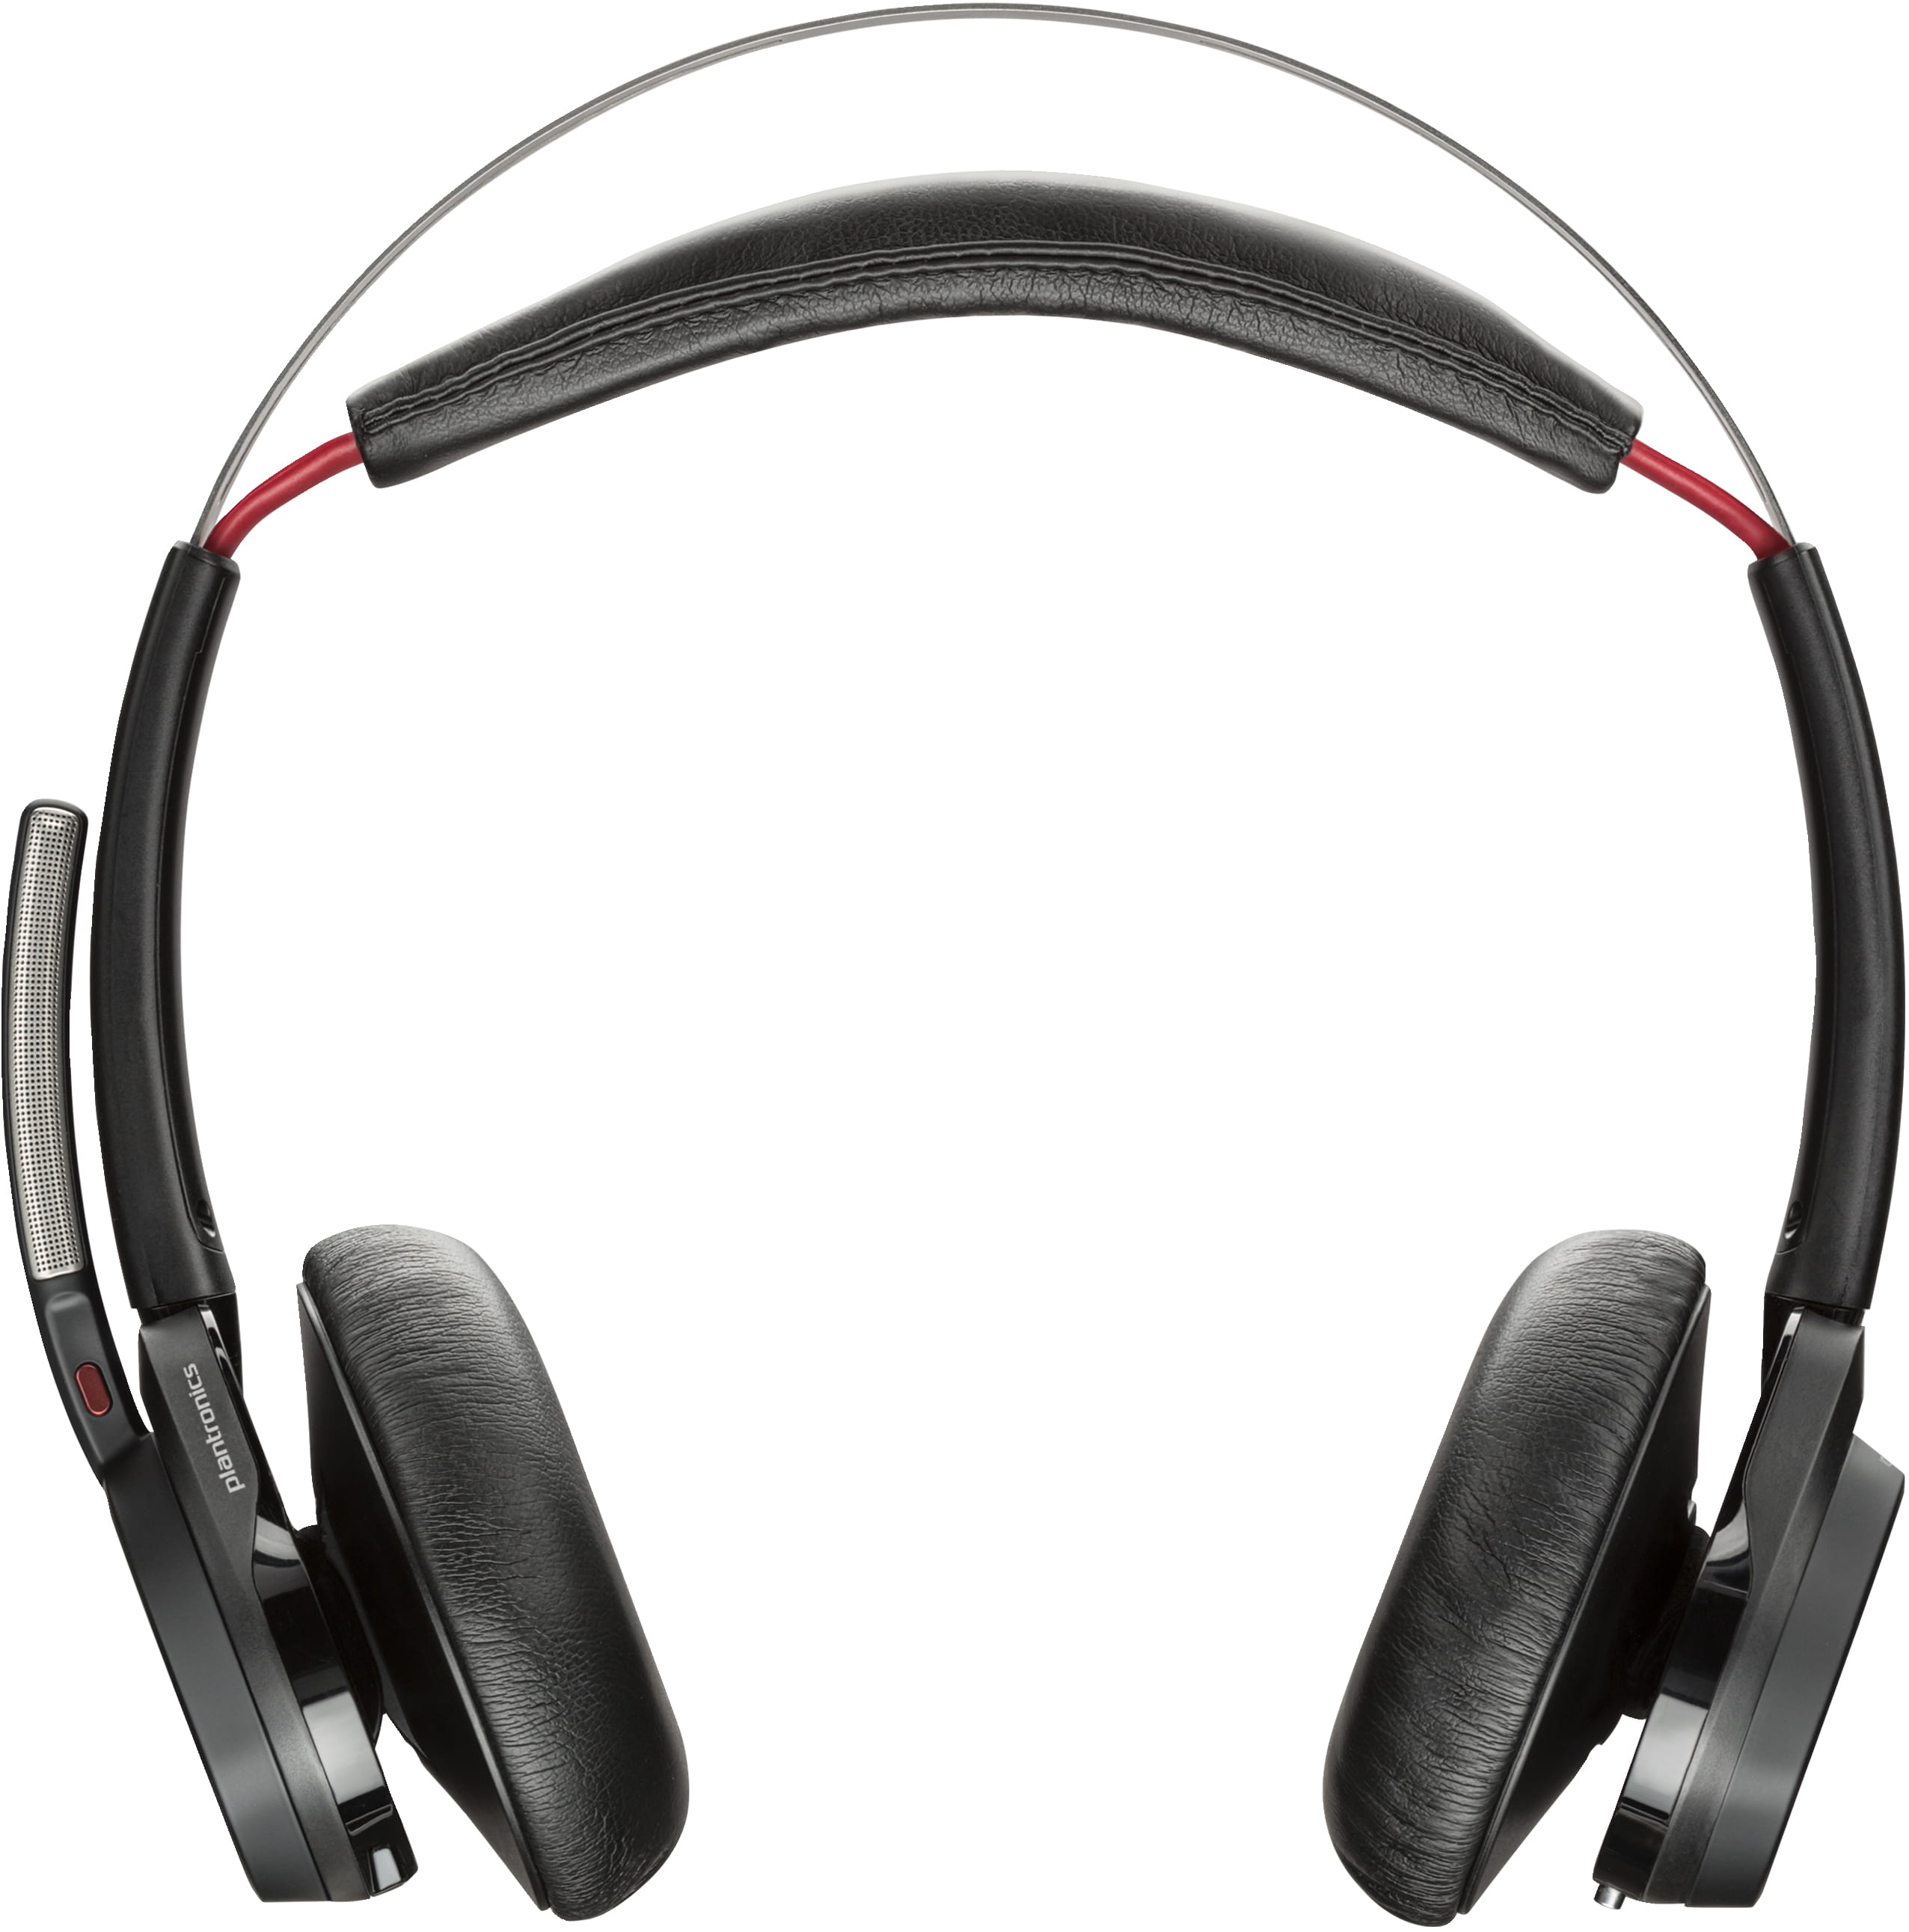 HP Poly Voyager Focus UC B825 - Headset - On-Ear